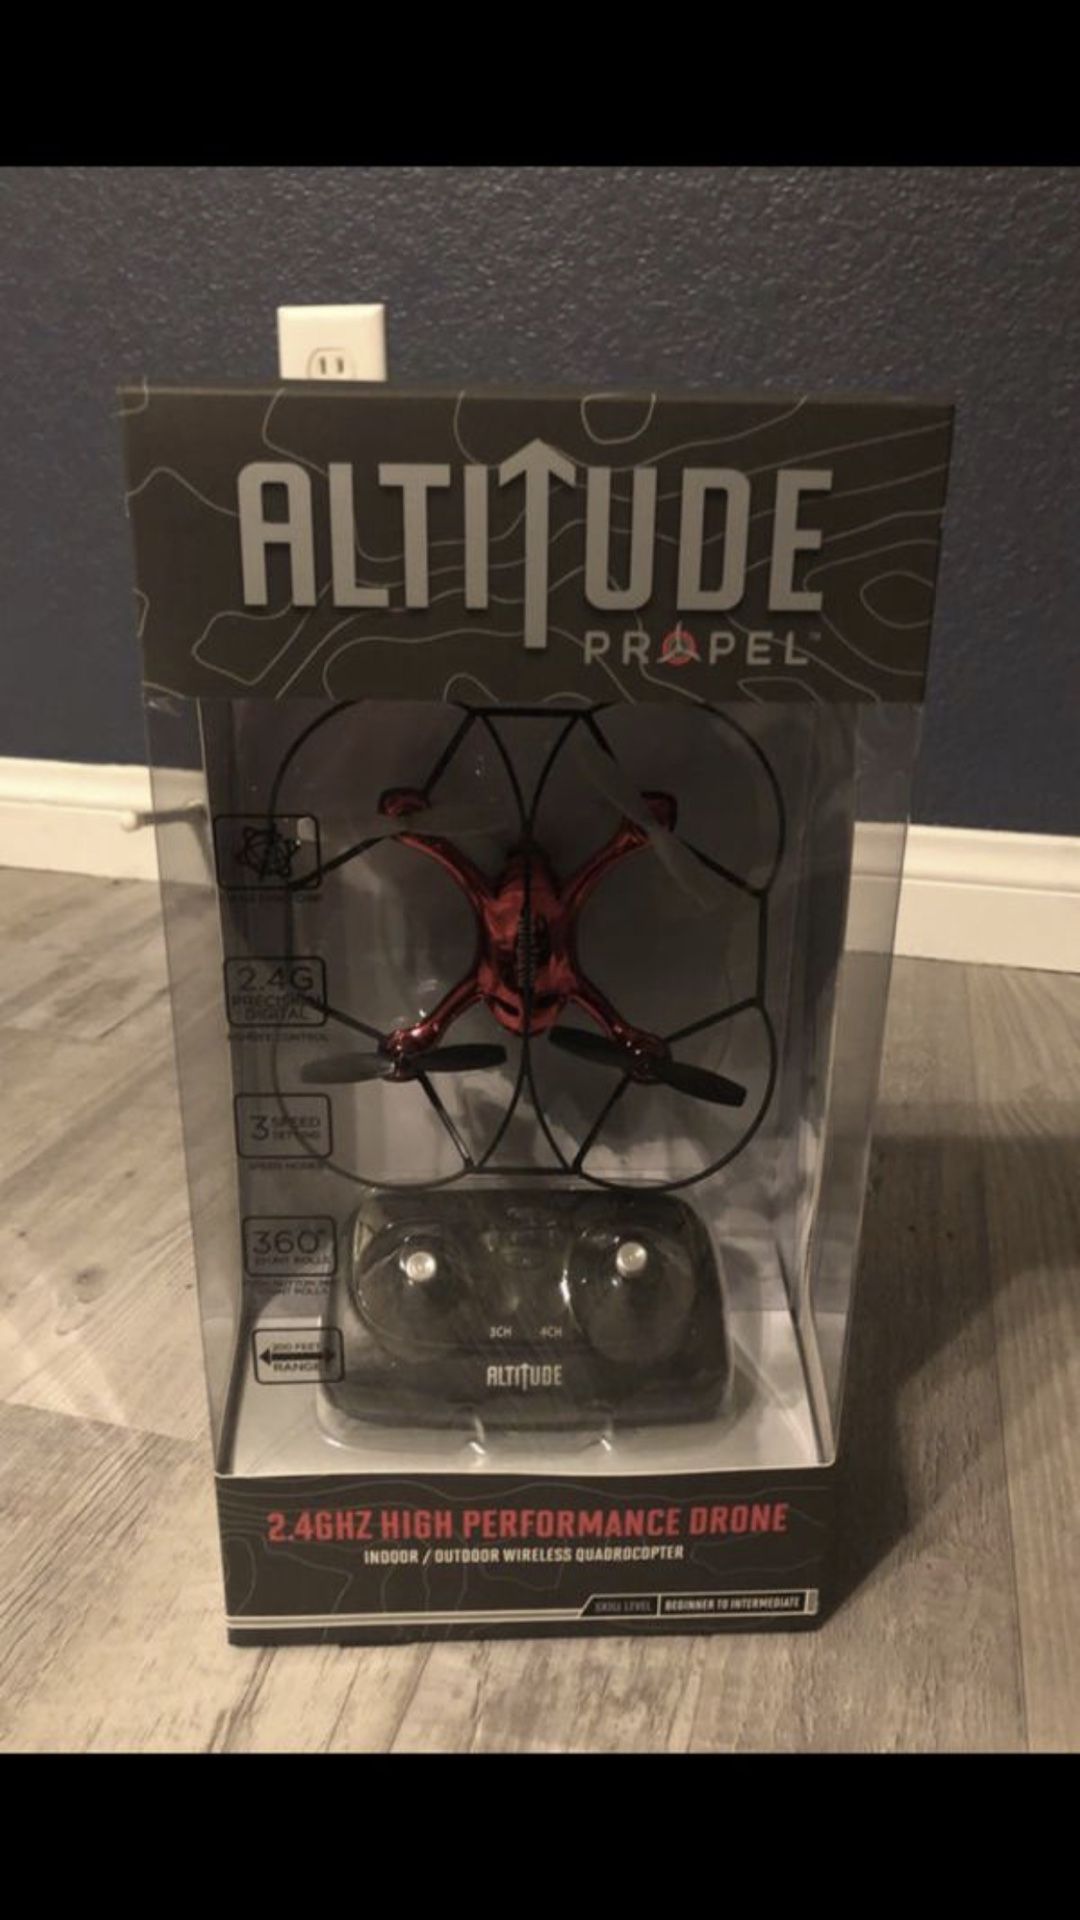 Altitude Propel 2.4 GHZ high performance drone